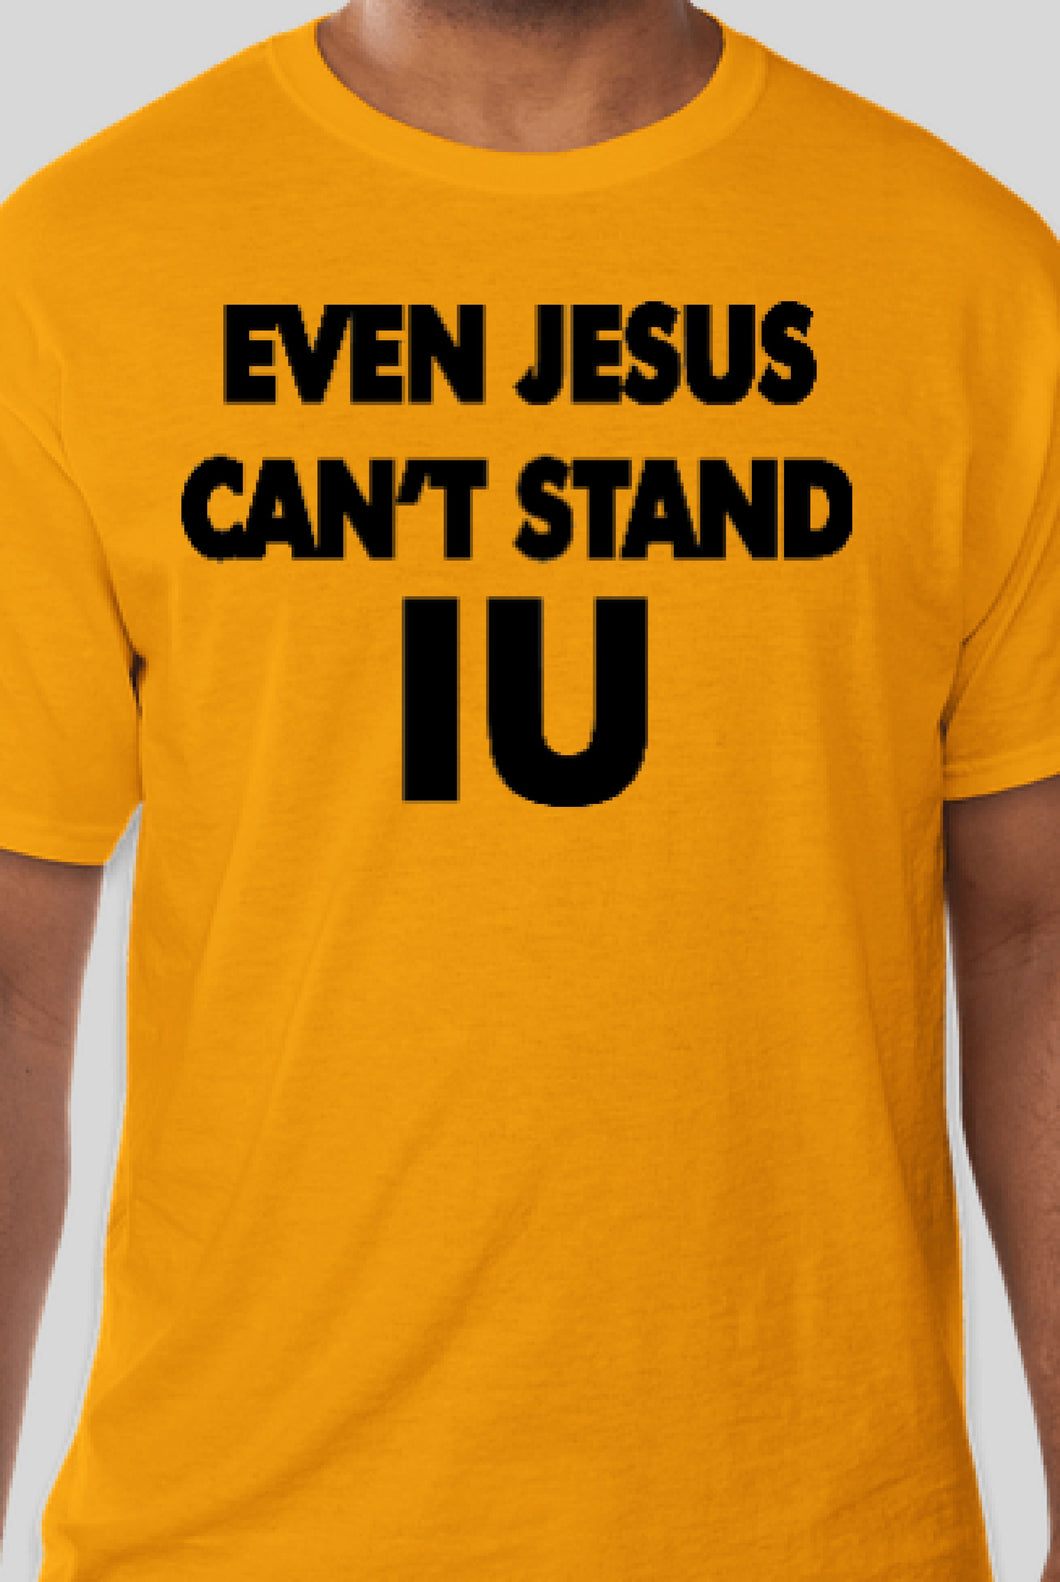 Even Jesus Can't Stand IU